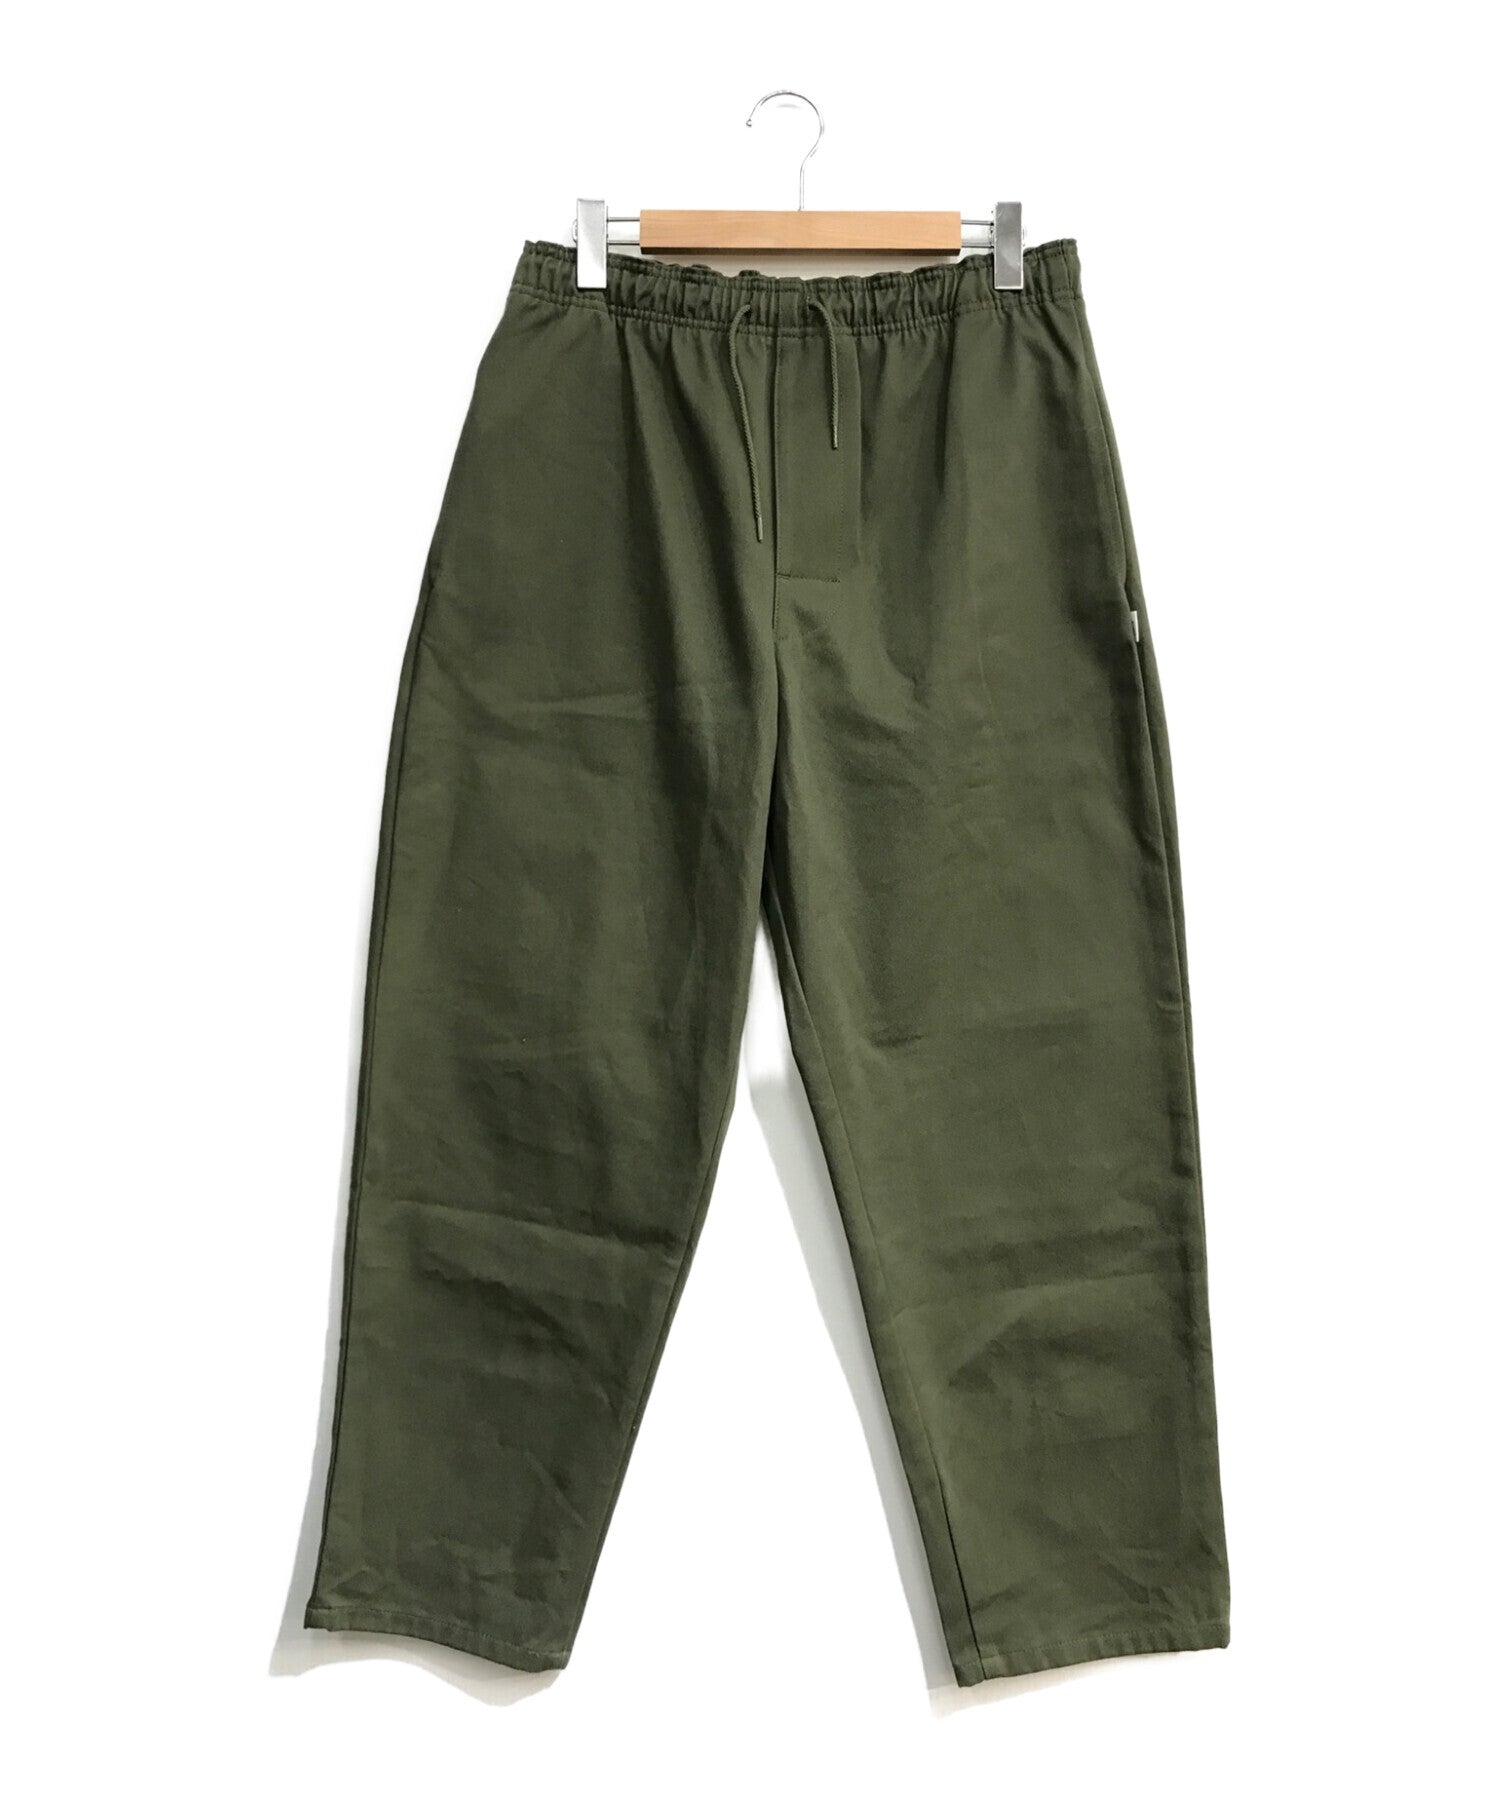 WTAPS seagull 03 trousers cotton twill 212wvdt-ptm08 212wvdt-ptm08